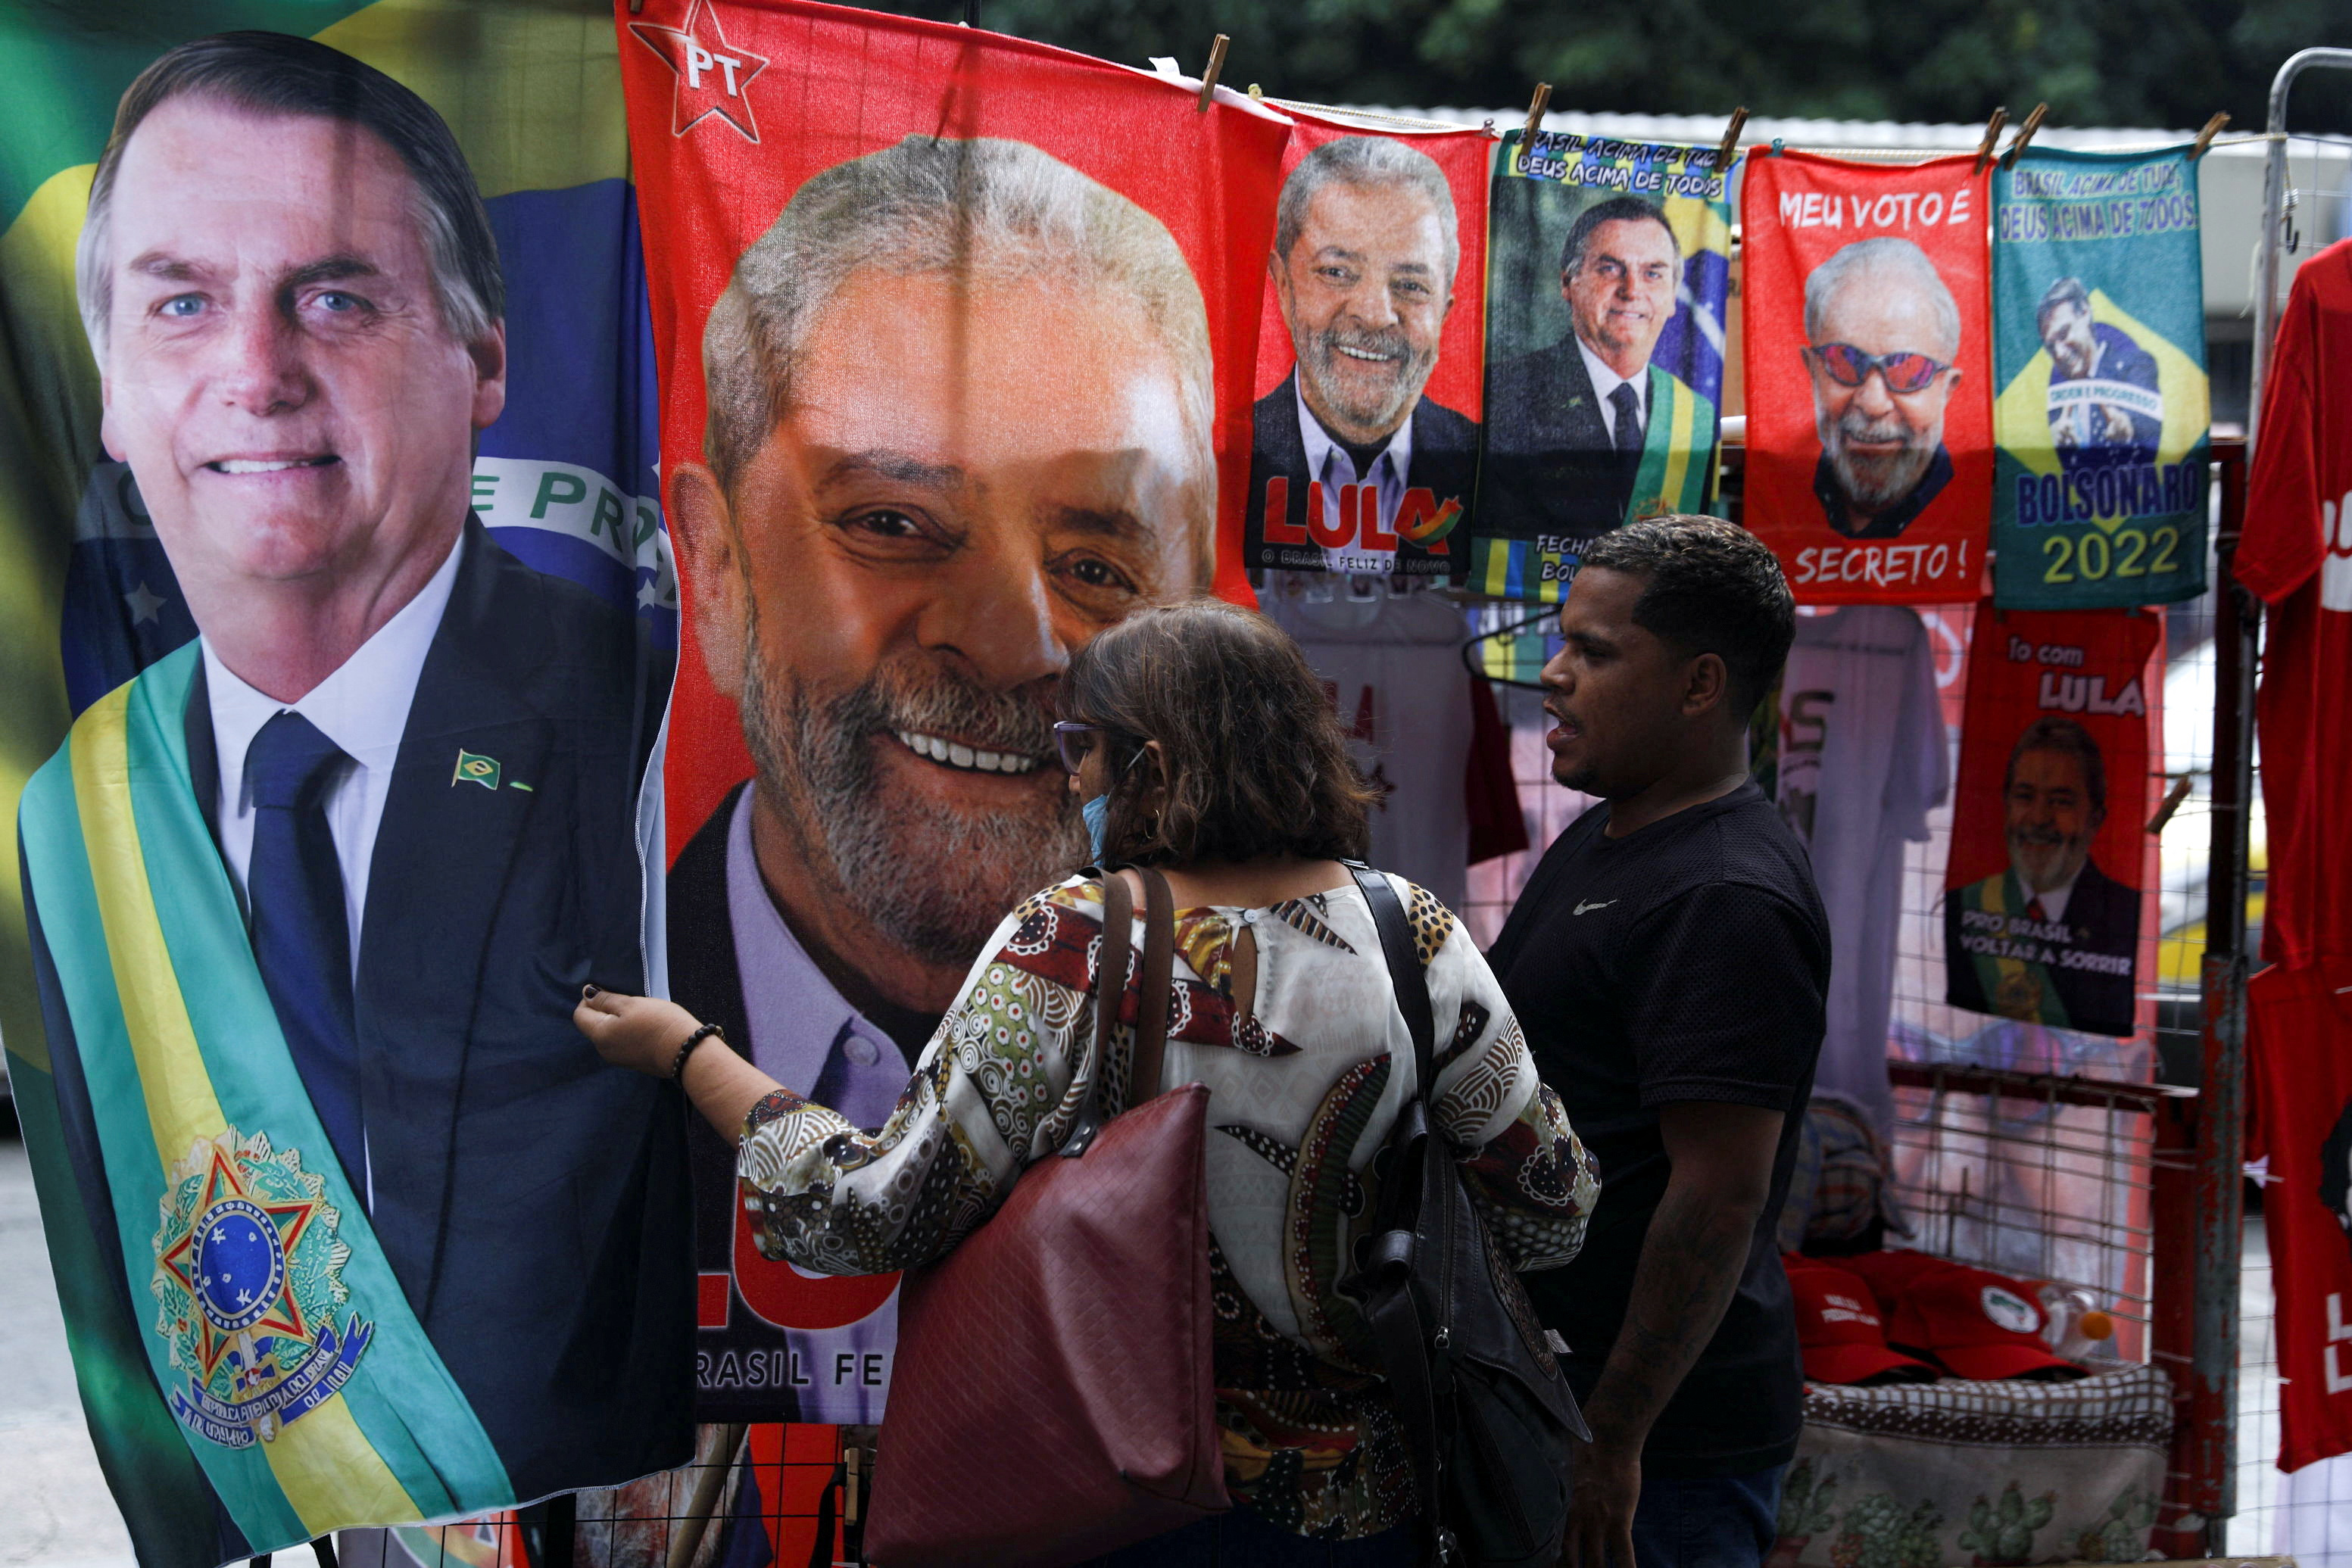 Presidential campaign materials displayed in Rio de Janeiro